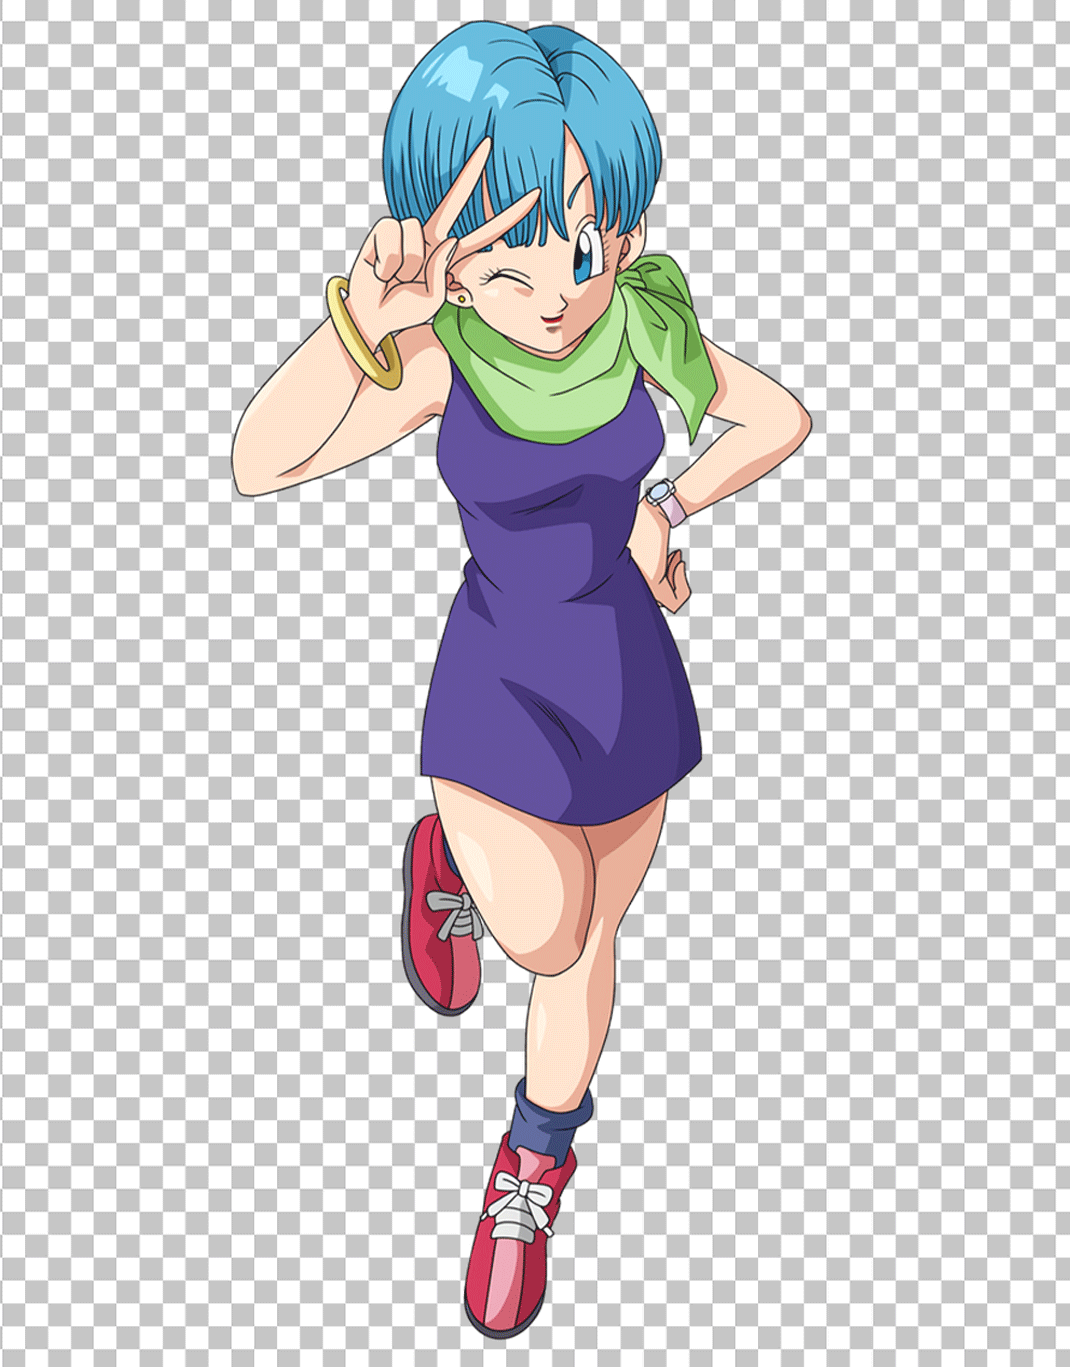 Bulma giving a peace sign PNG Image